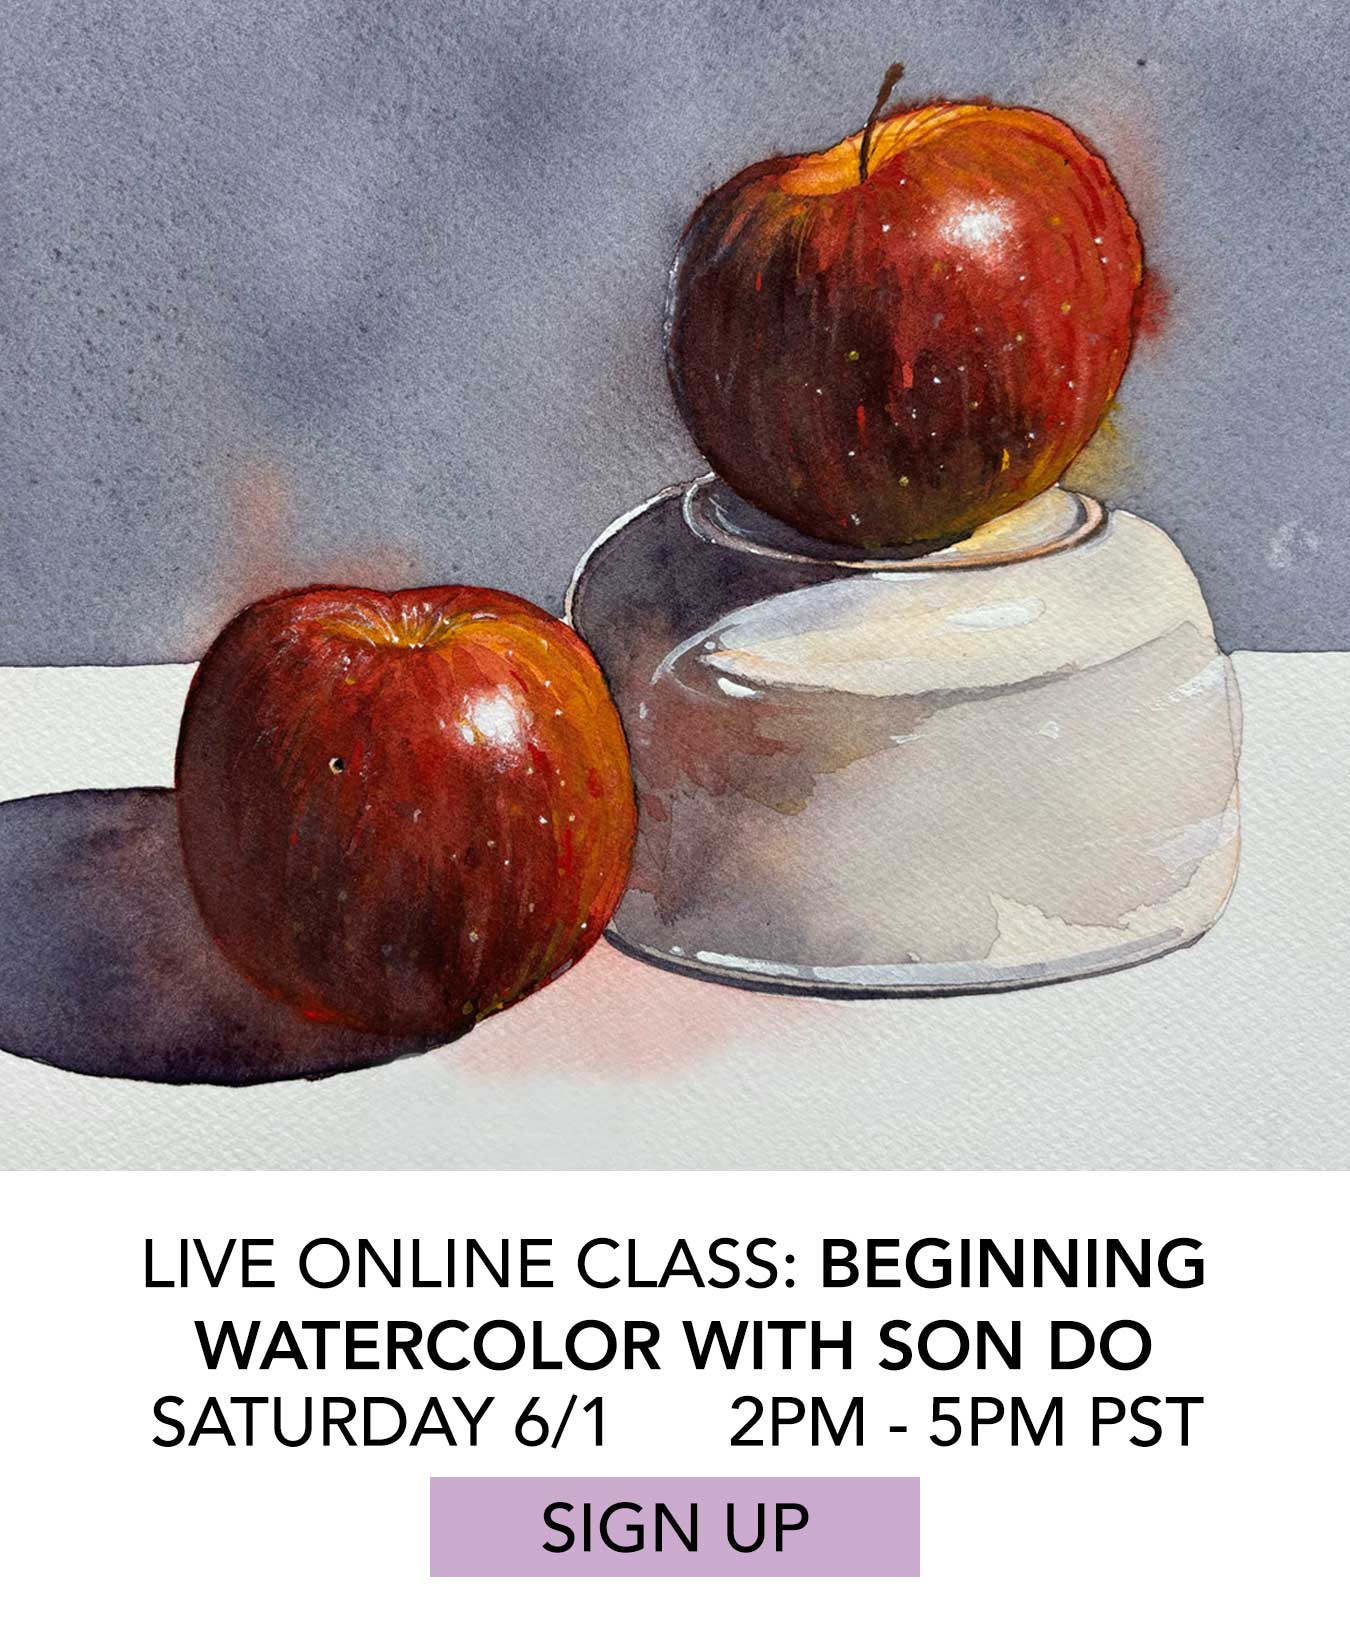 Live Online Class: Beginning Watercolor with Son Do. Saturday 6/1 from 2:00pm to 5:00pm. Click to Sign Up.